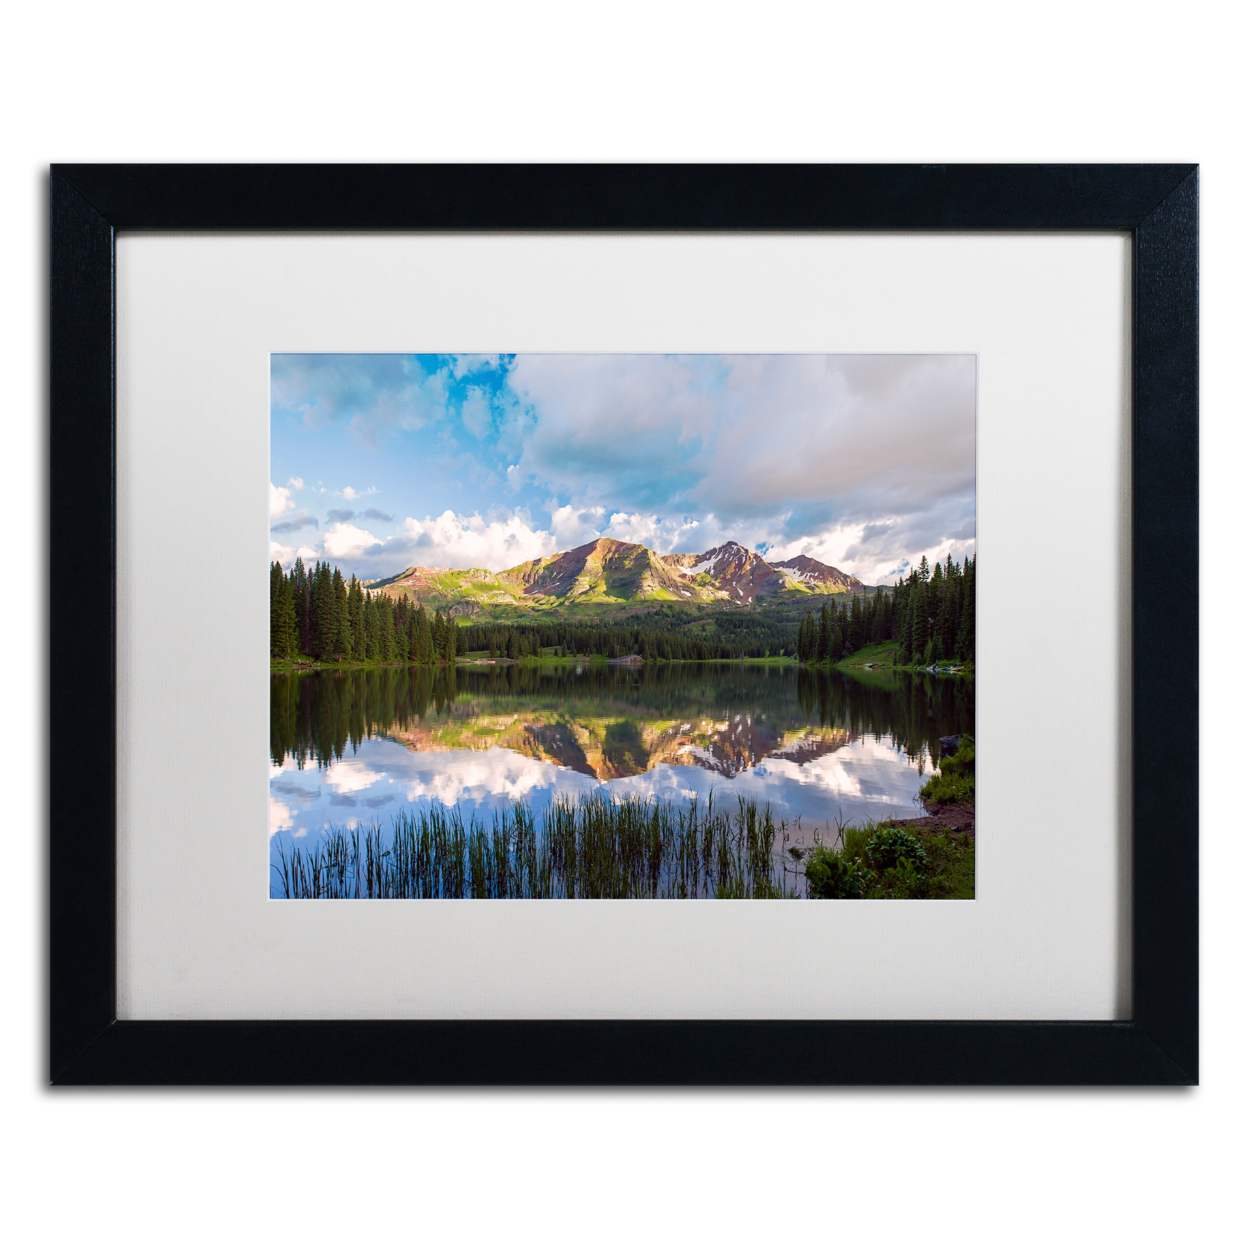 Michael Blanchette Photography 'Ruby Peaks' Black Wooden Framed Art 18 X 22 Inches